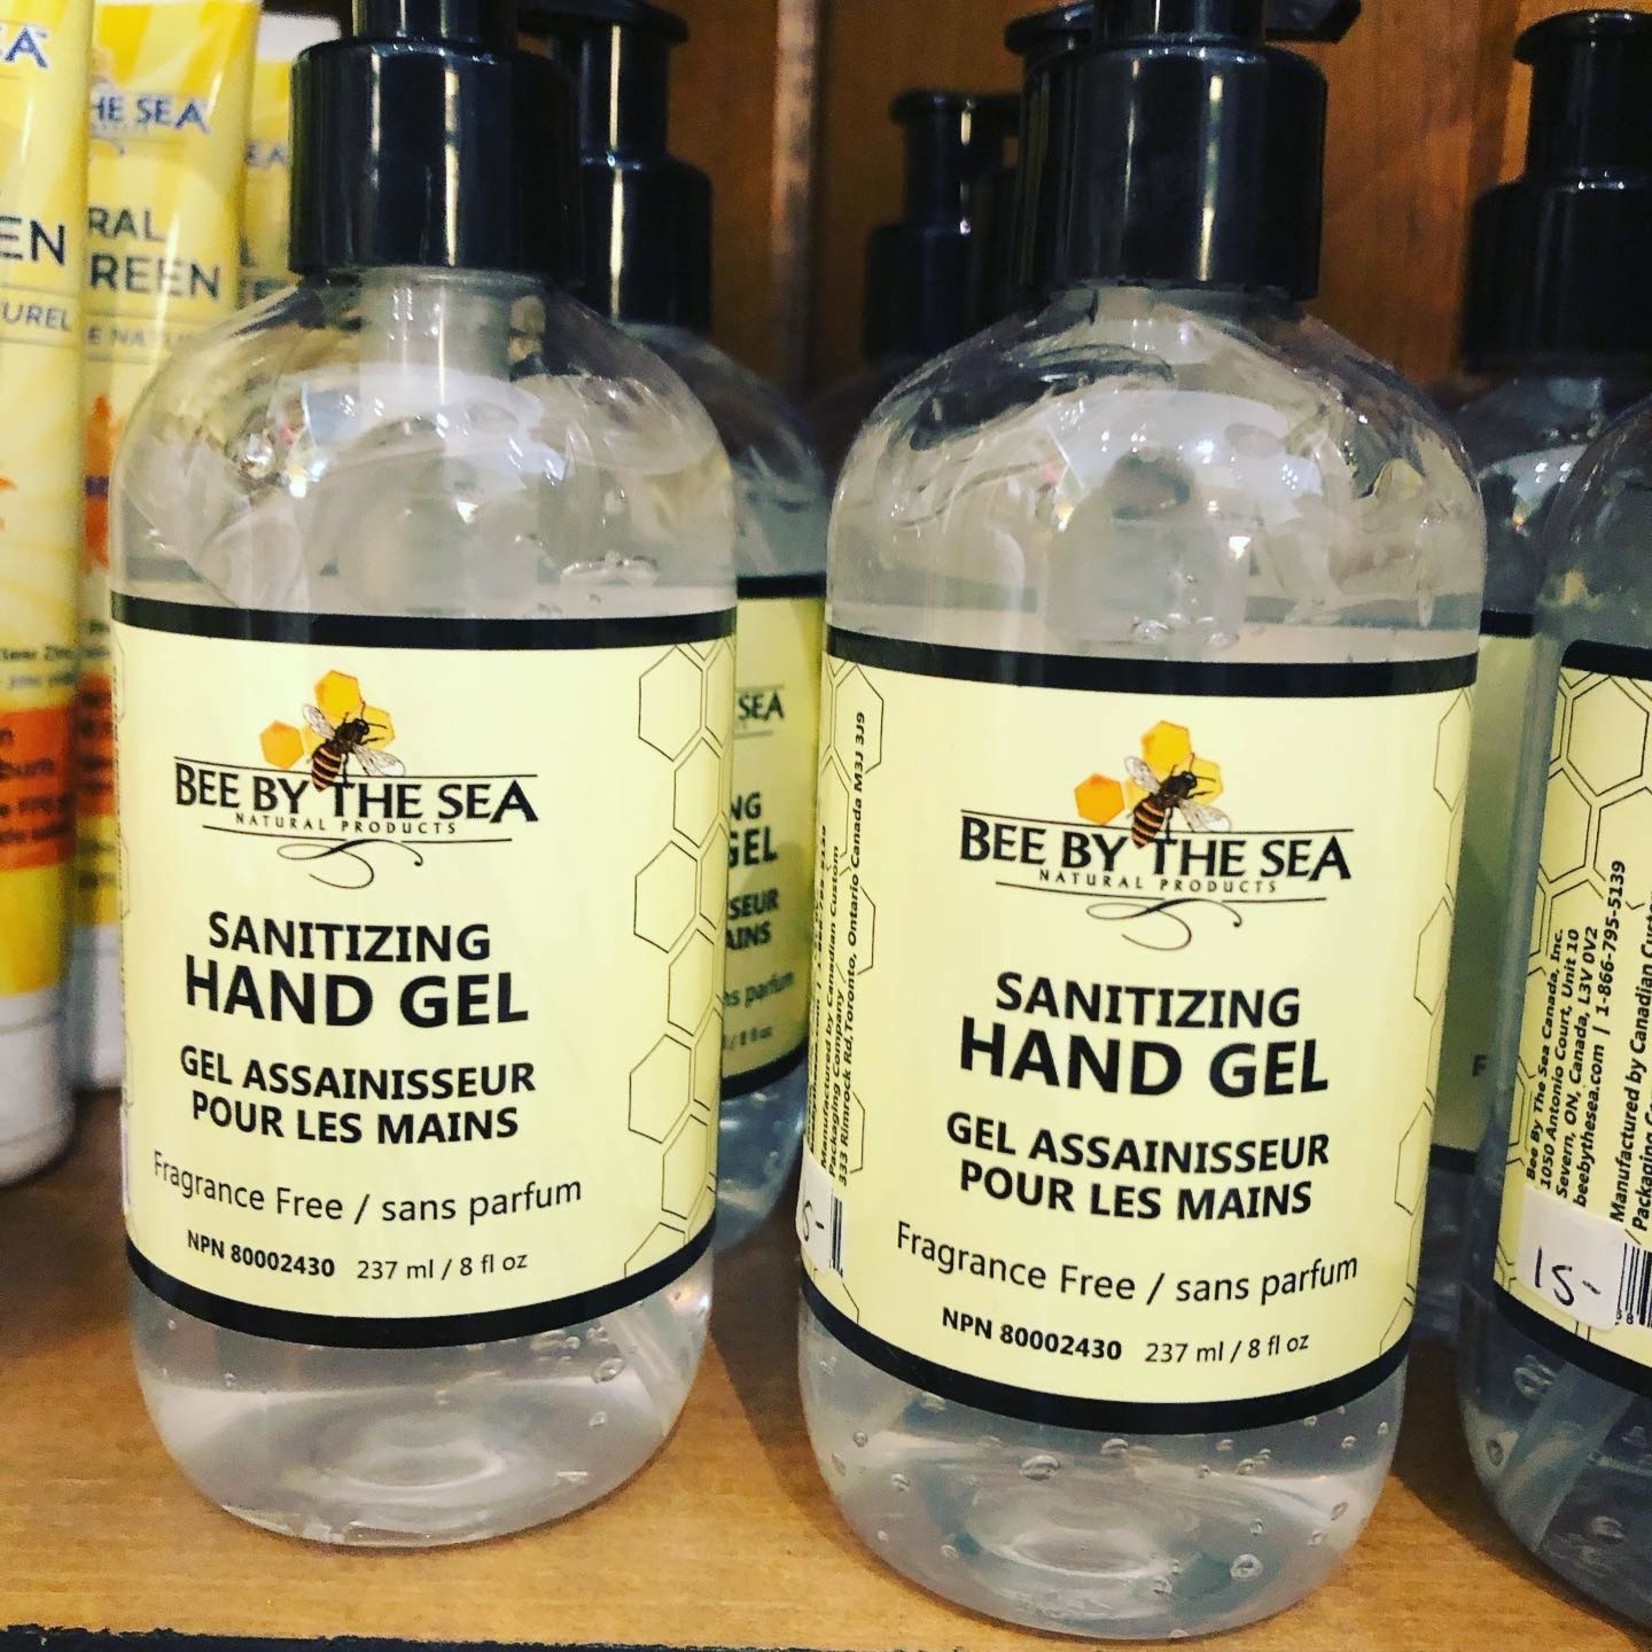 Bee by the Sea Handsanitizer